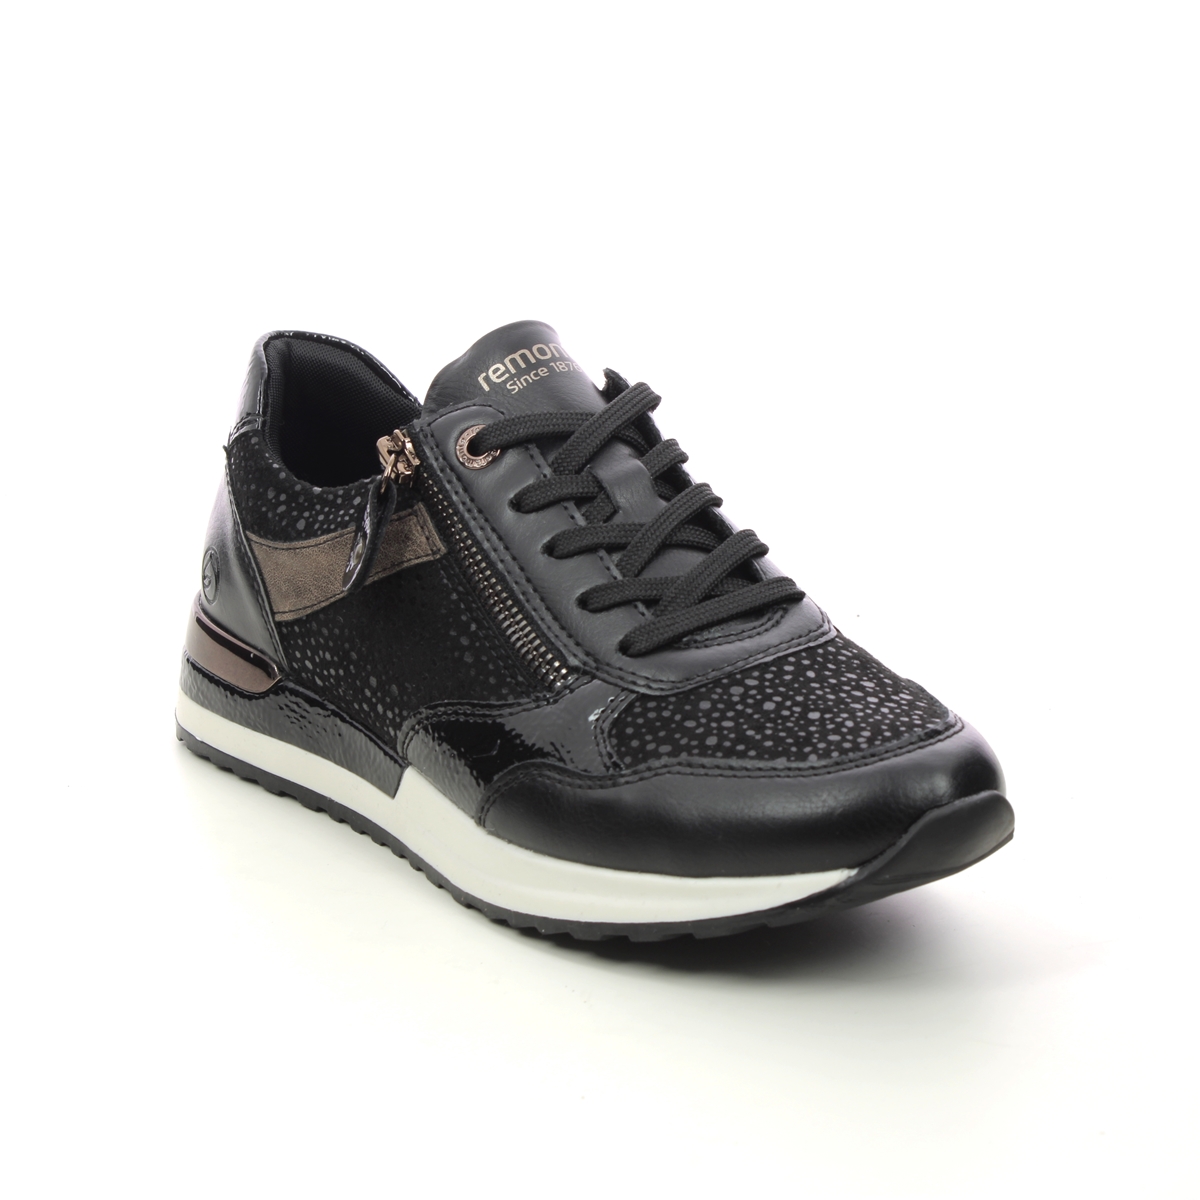 Remonte Vapour Lulea Black Womens Trainers R2548-01 In Size 36 In Plain Black